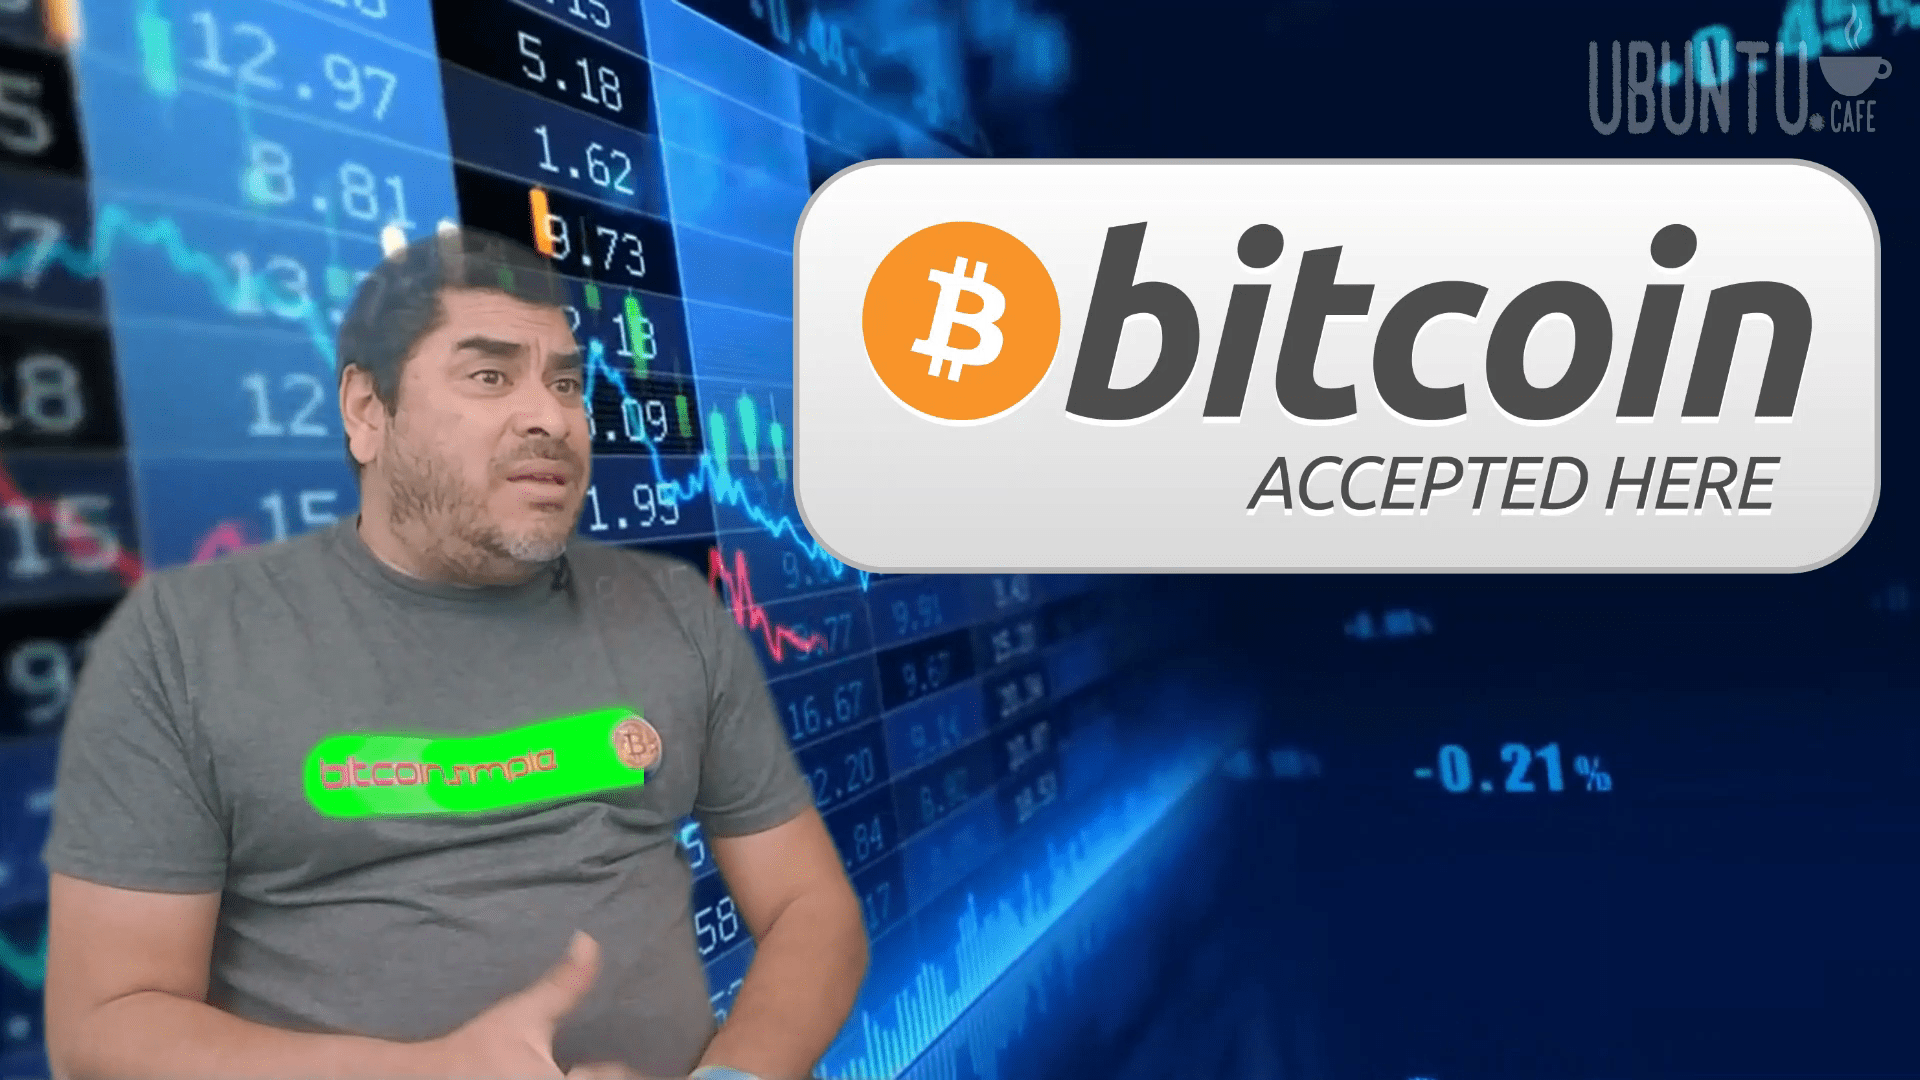 How to Buy and Trade Bitcoins and Criptocurrencies